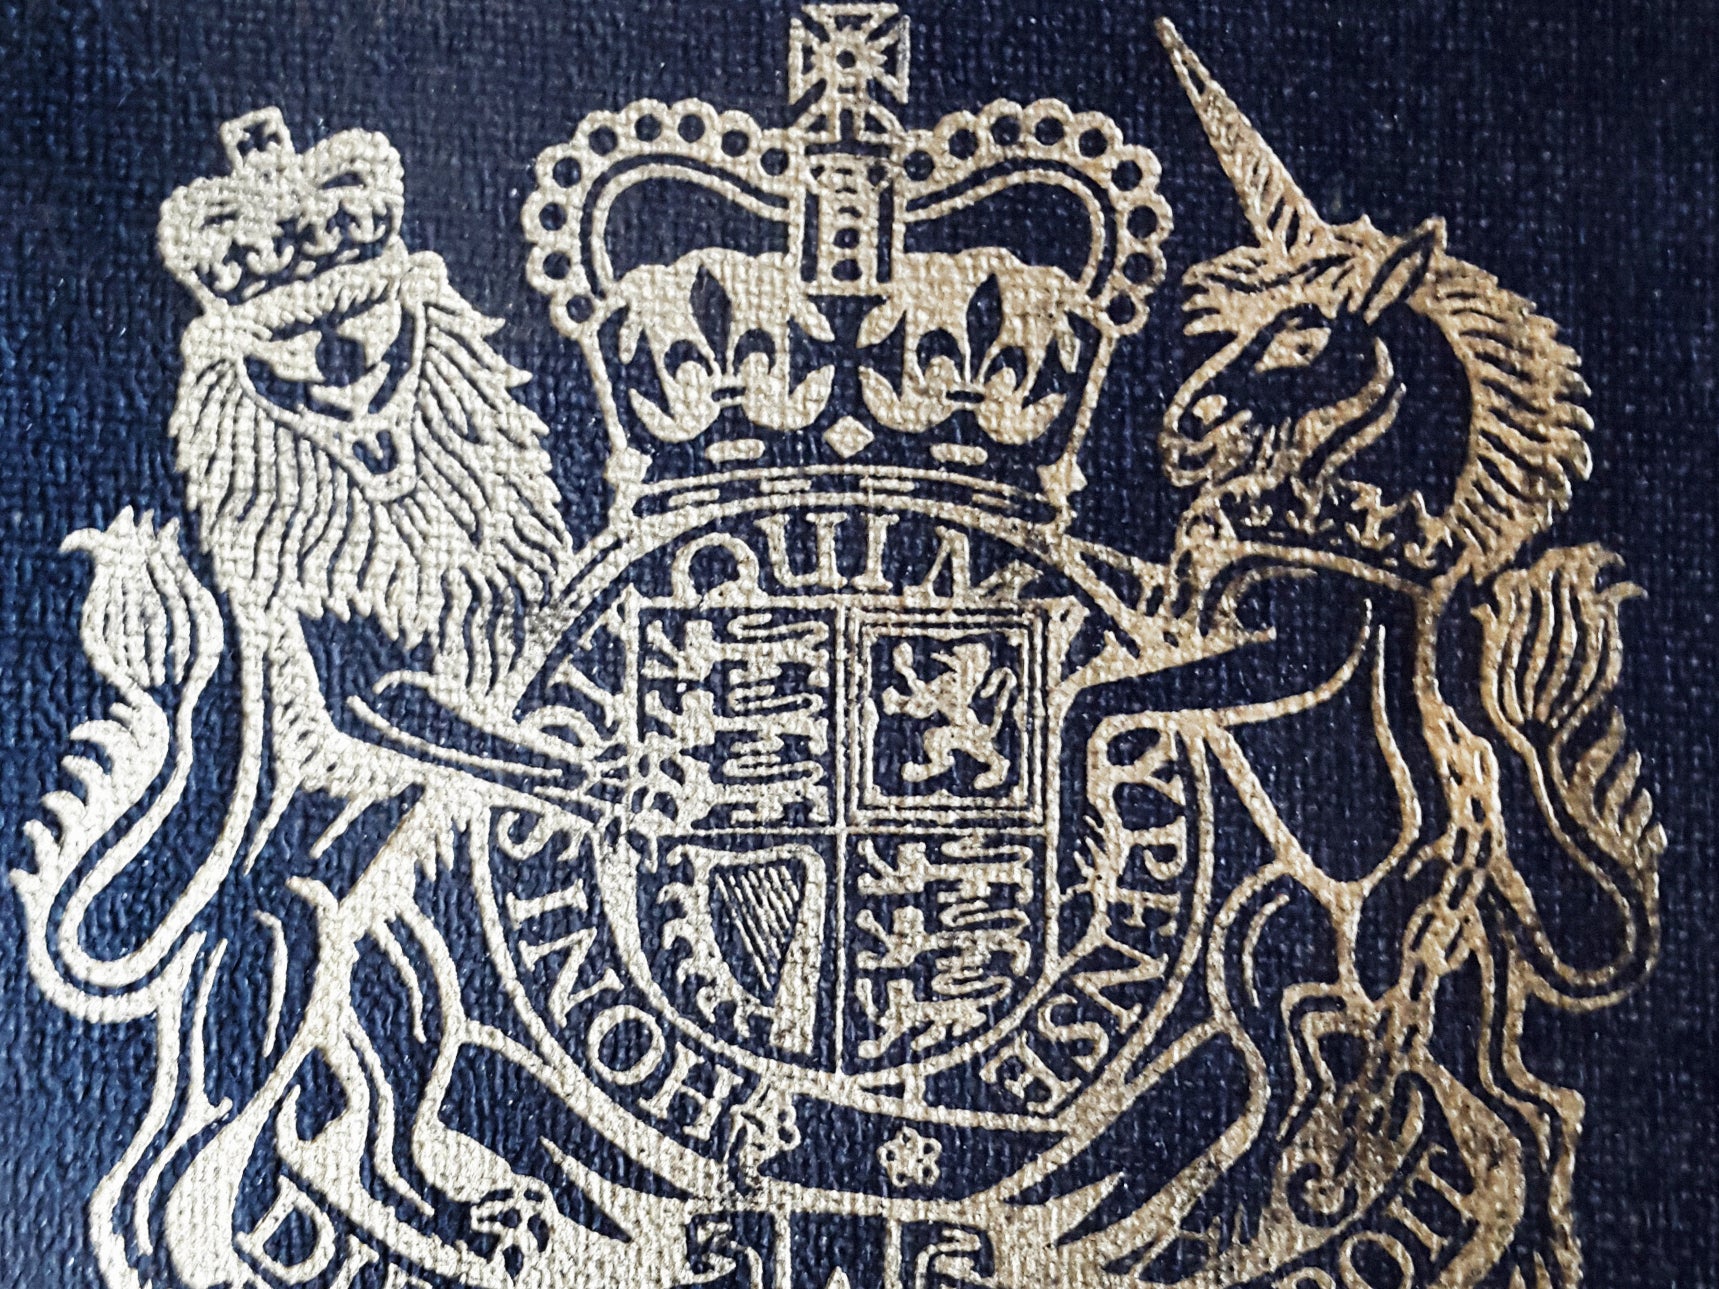 We are returning to the 'iconic' blue passport in 2019